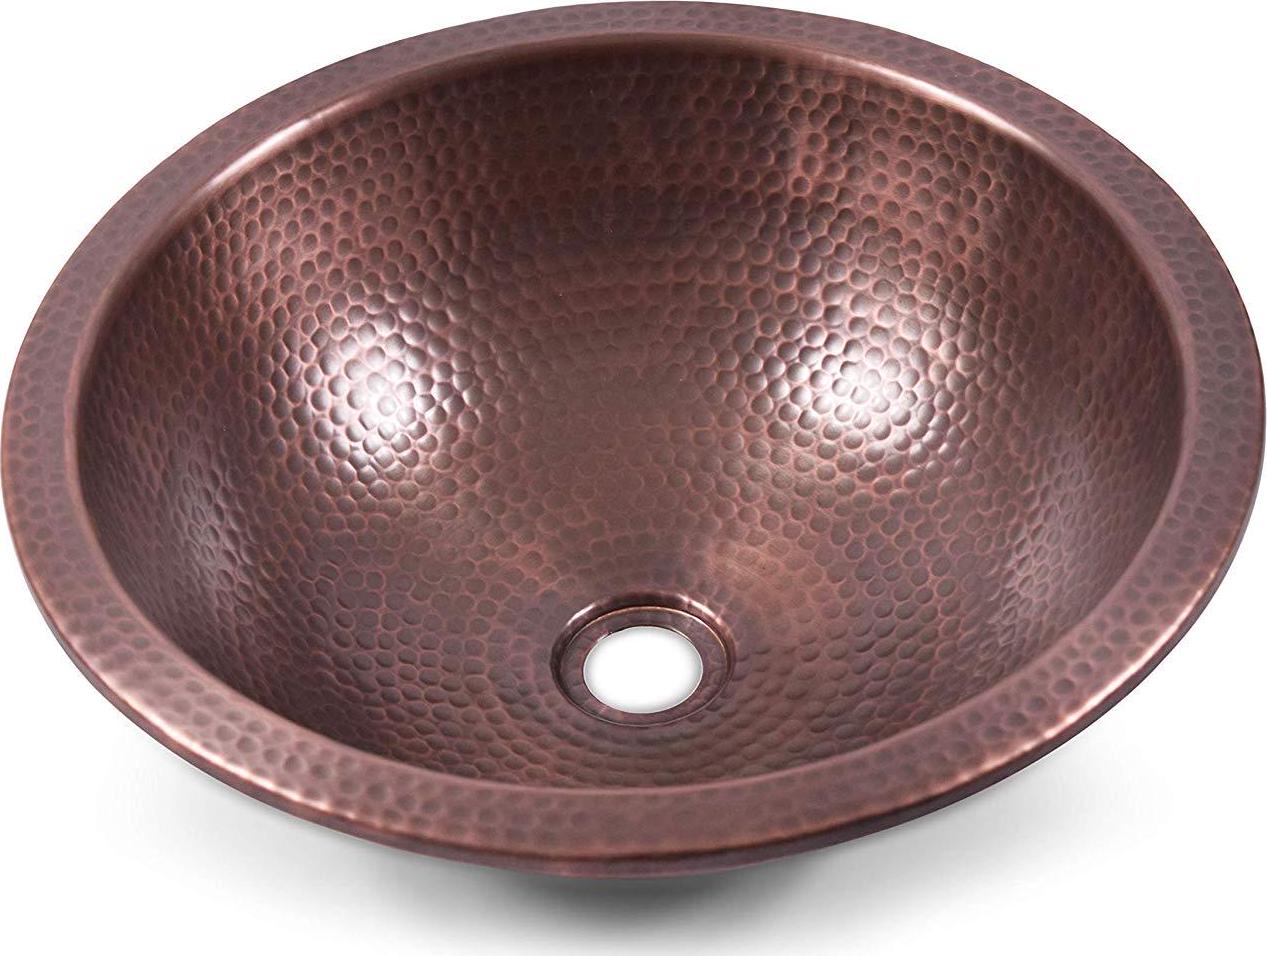 Monarch Abode Pure Copper Hand Hammered Rotunda Dual Mount Sink (16 inches)